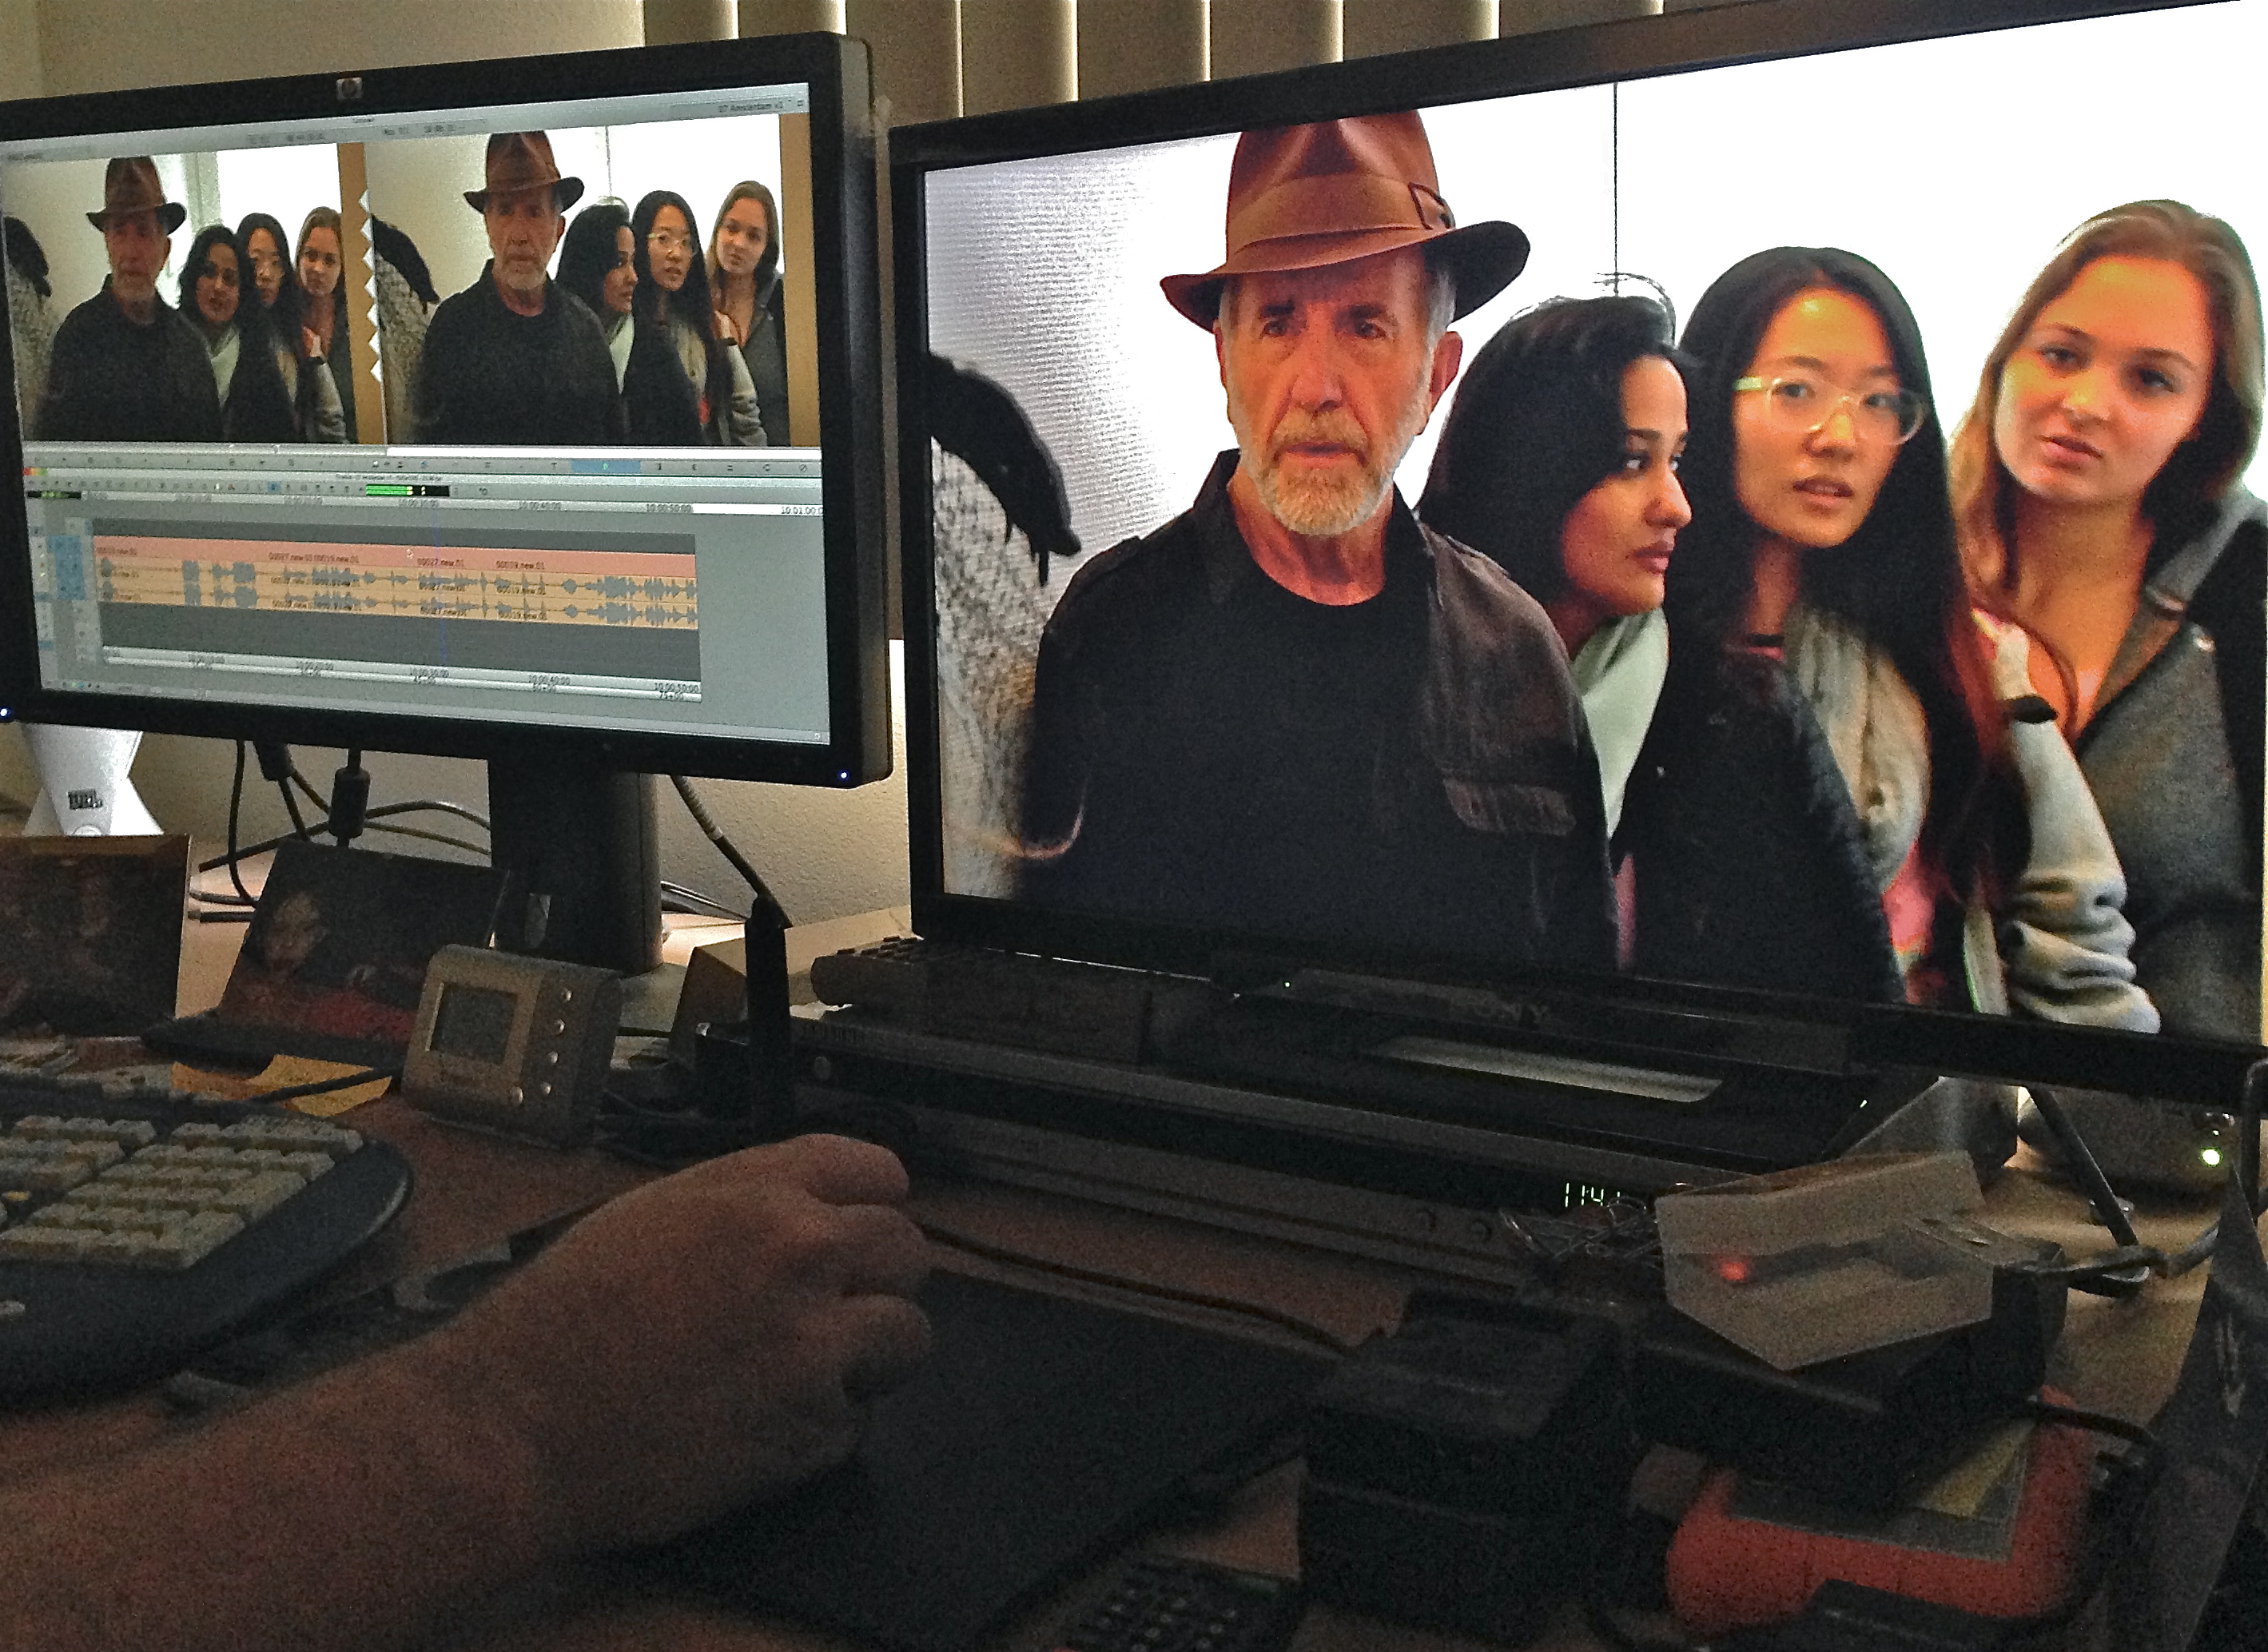 ...Where is she now? A DocuMystery (in the Editing Room)